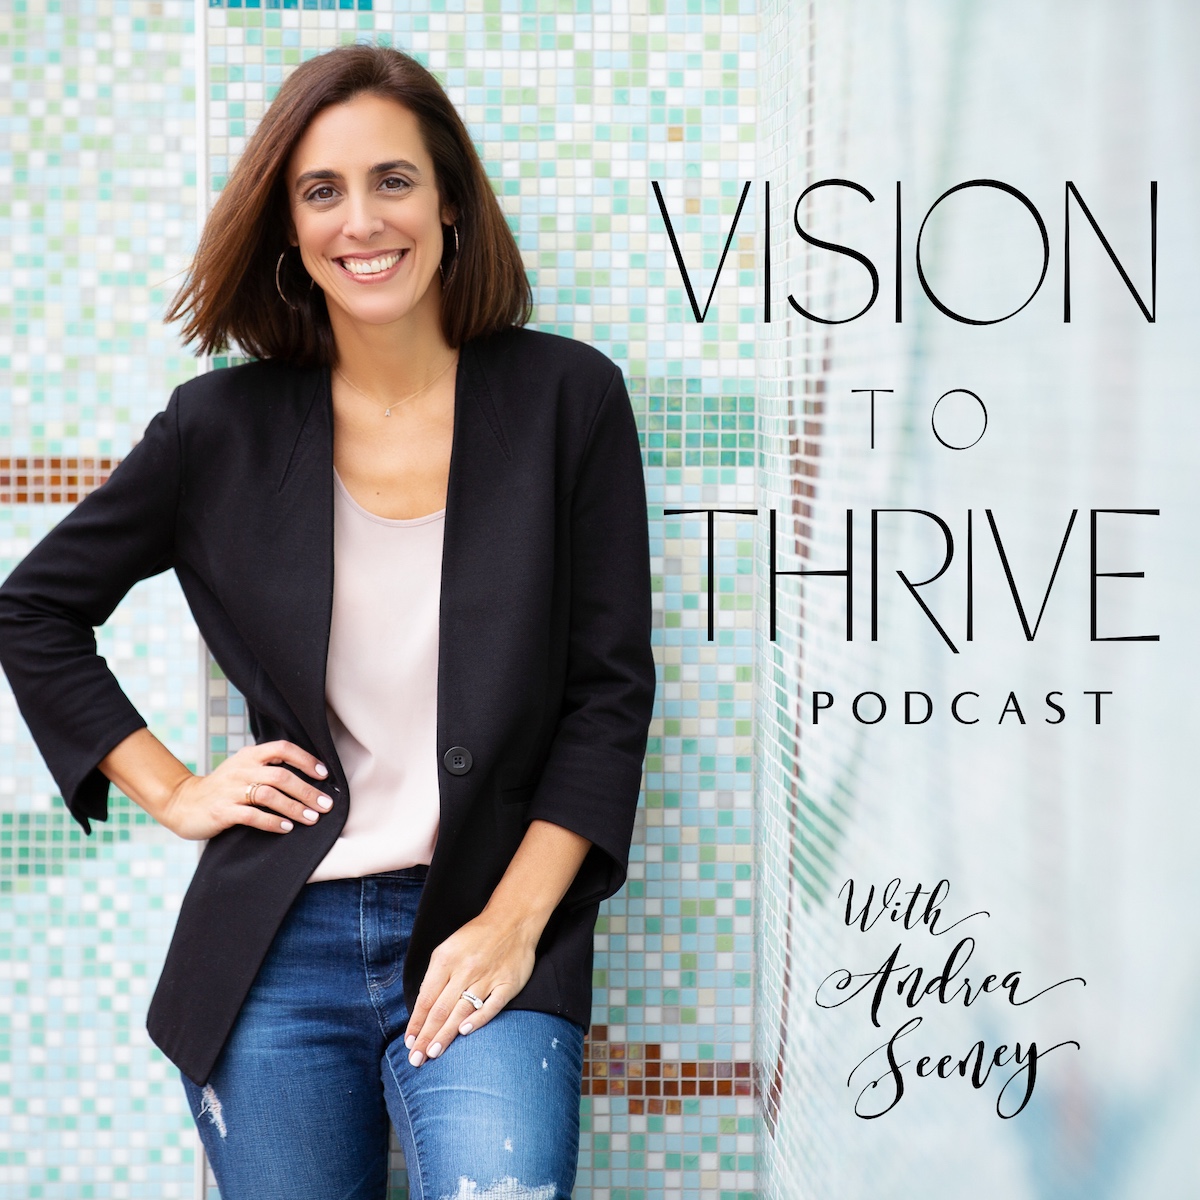 Vision to Thrive Podcast with Andrea Seeney